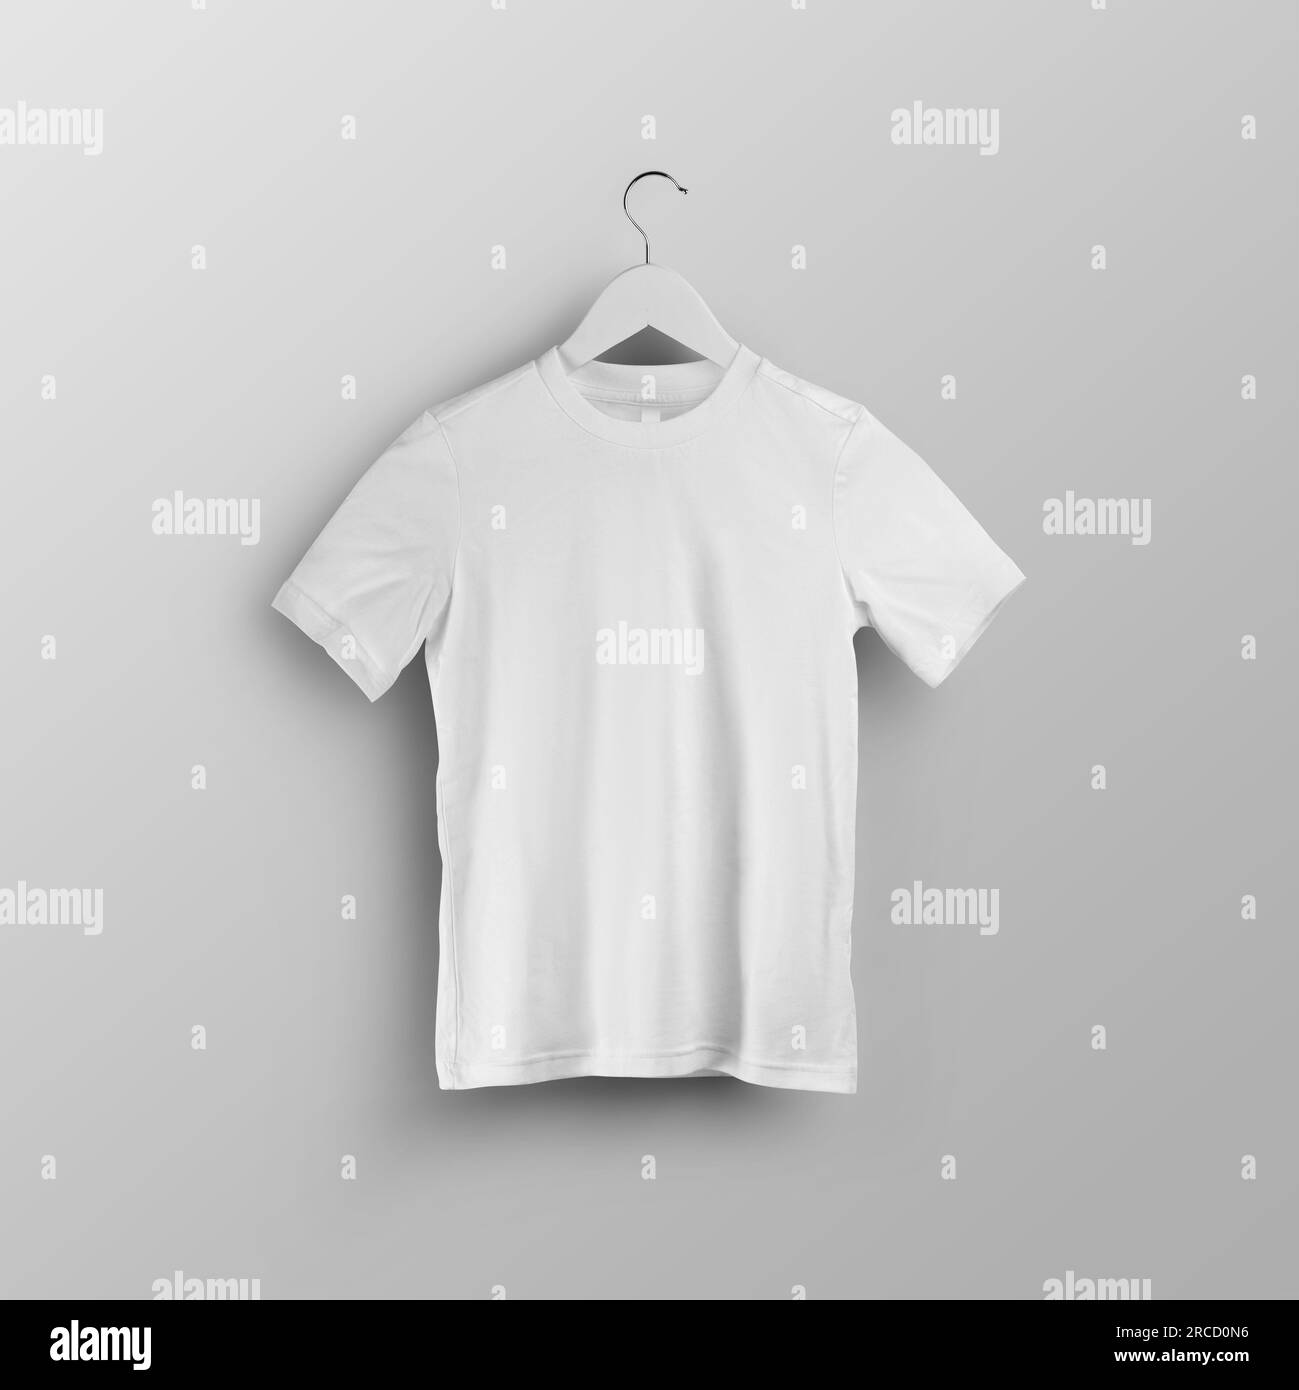 Children's white t-shirt template, blank shirt on hanger, front view, isolated on background. Mockup of stylish kids clothing for design, product phot Stock Photo